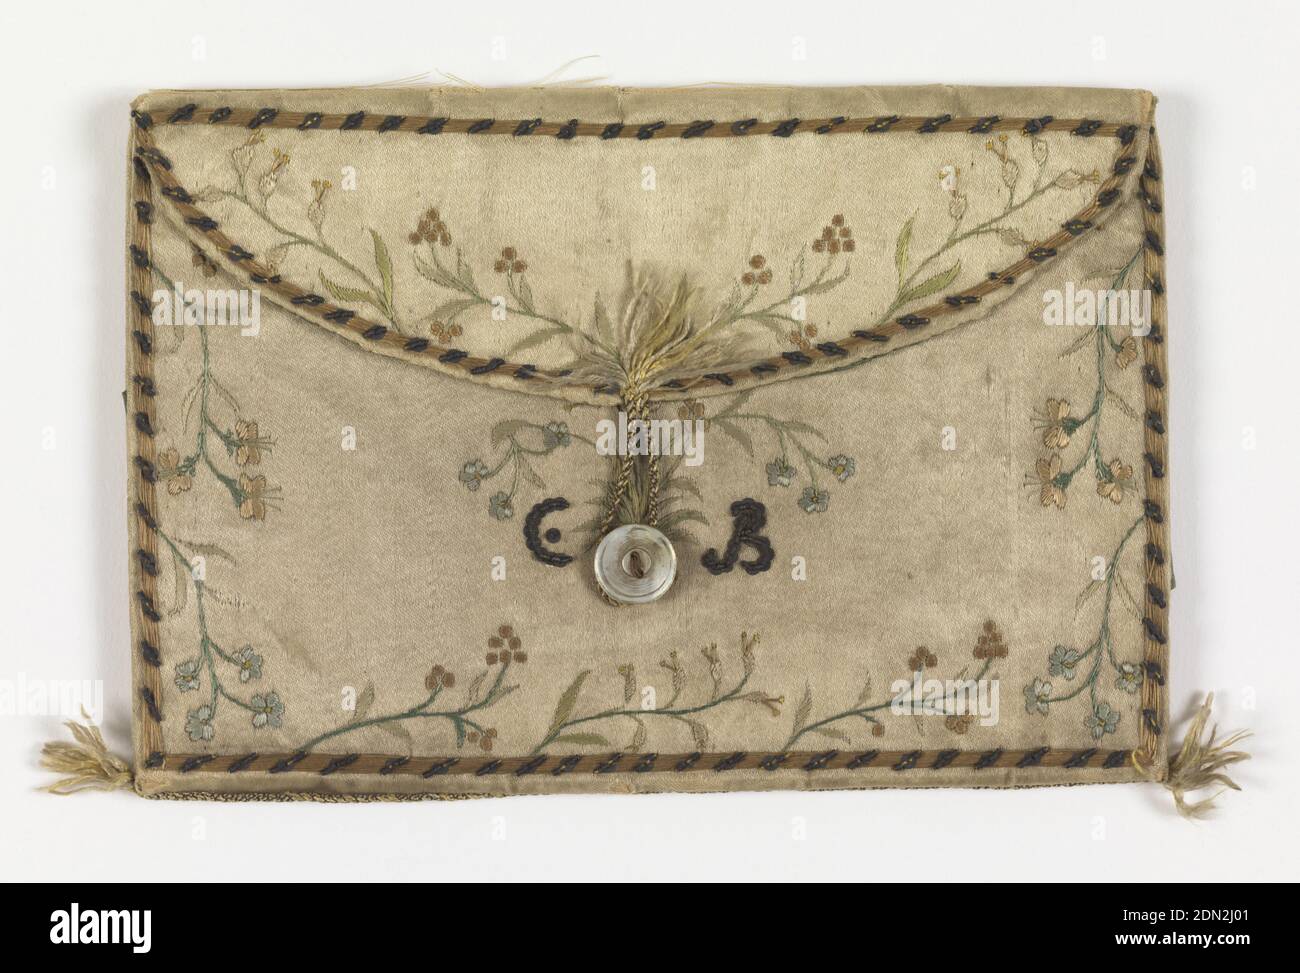 Card case, Medium: silk, metallic thread, pearl button Technique: embroidered, Silk-covered case ornamented with small flowers and the initials 'C.B.' in silks and metallic-thread embroidery. Fastens with pearl button and loop. Green silk lining., France, 18th century, costume & accessories, Card case Stock Photo